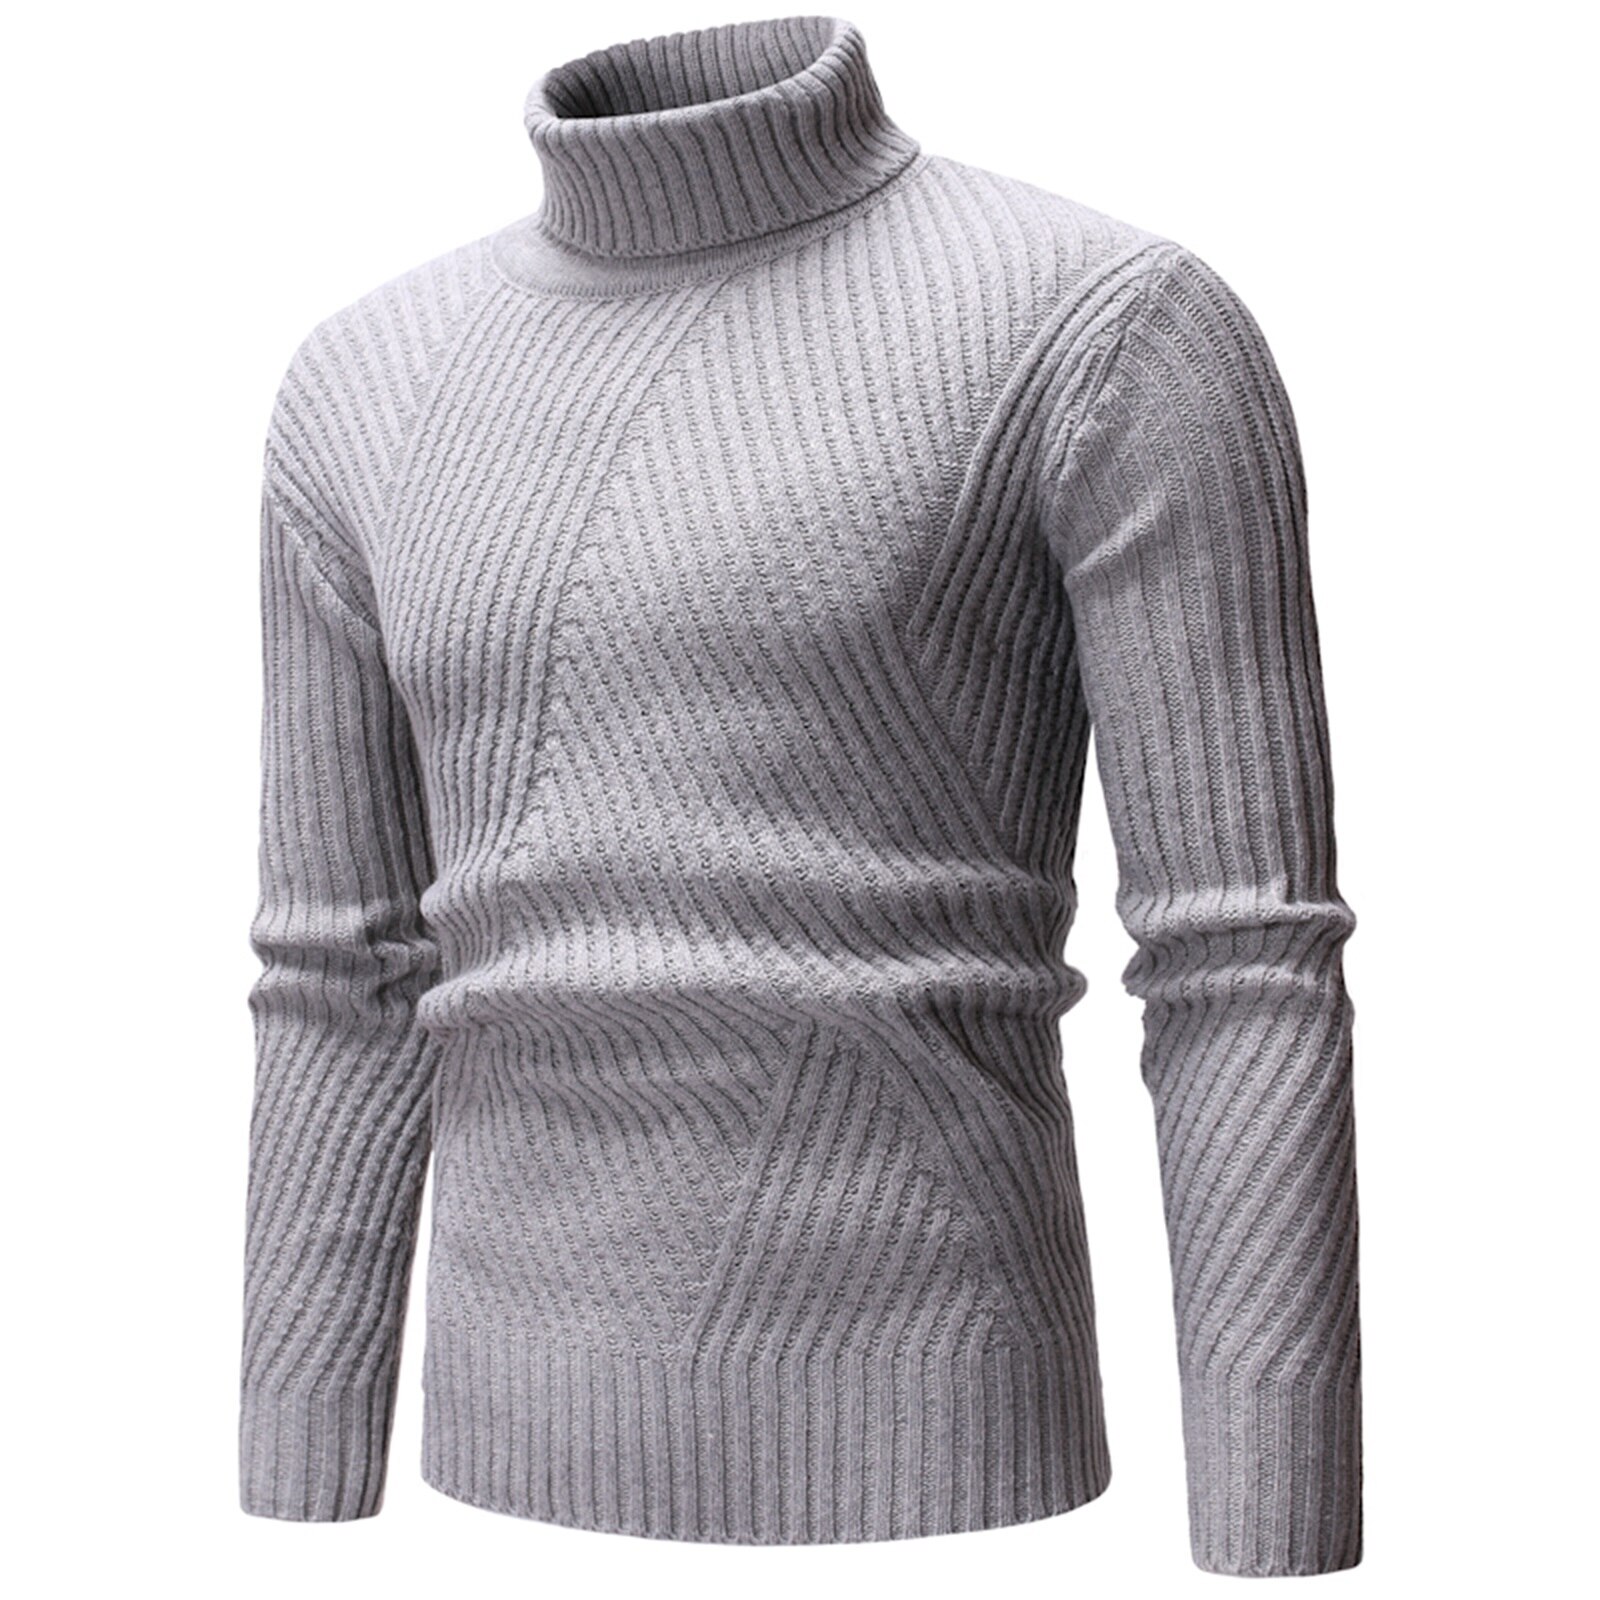 Fashion Men Wild Sweater Solid Color Turtleneck Long Sleeve Knitted Pullovers Autumn Winter Casual Outifts Slim Fit 